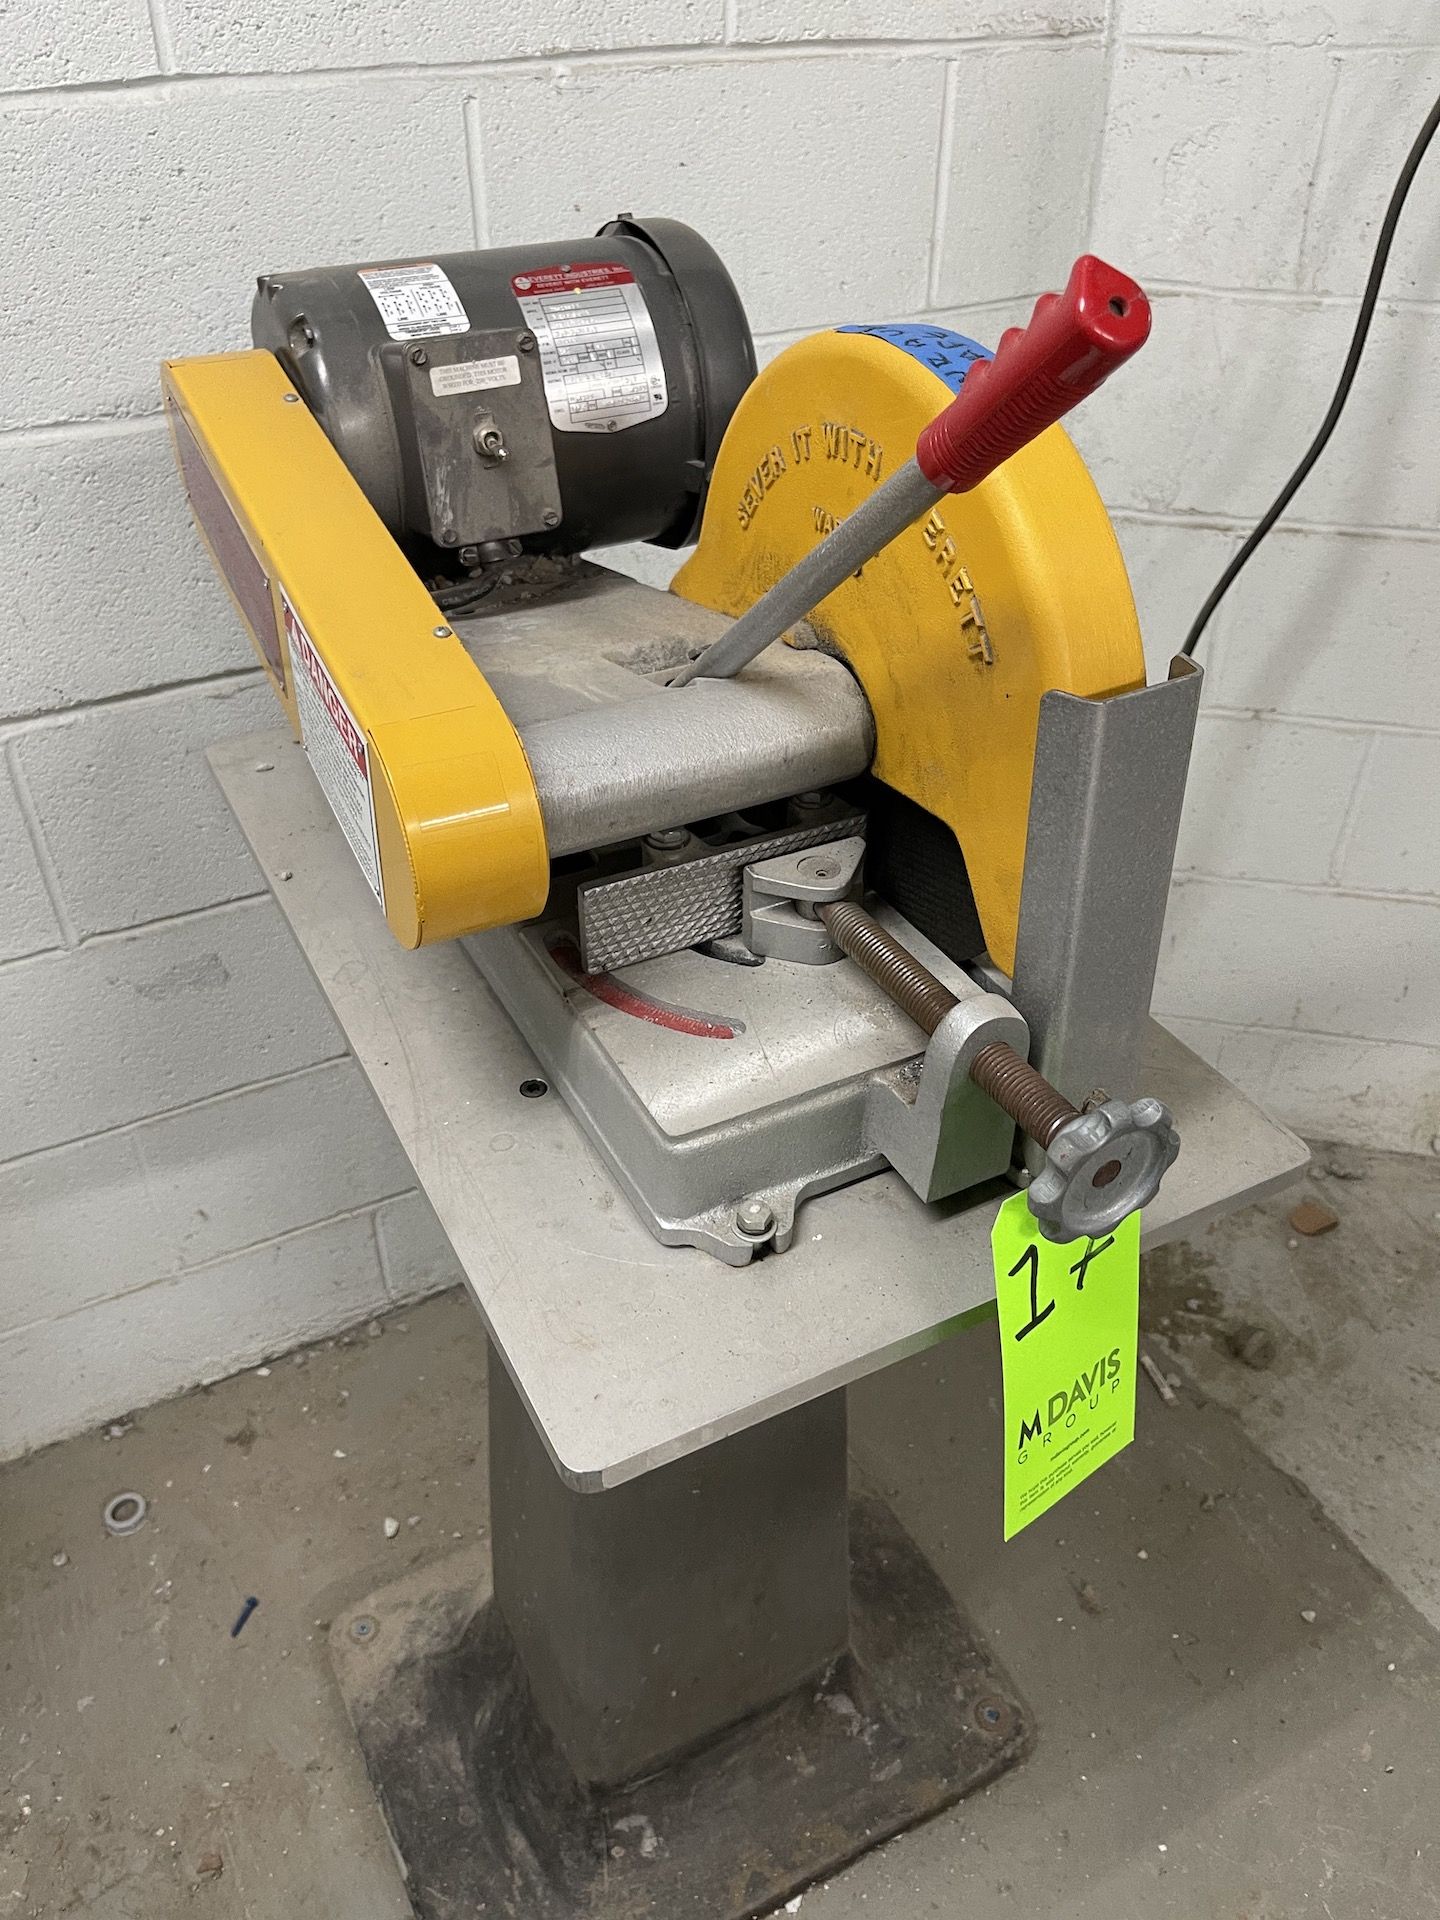 EVERETT 10'' METAL CUTTER, S/N 09-2026, 3 HP MOTOR, 3450 RPM, 208-230/460 V (Non-Negotiable Rigging, - Image 6 of 6